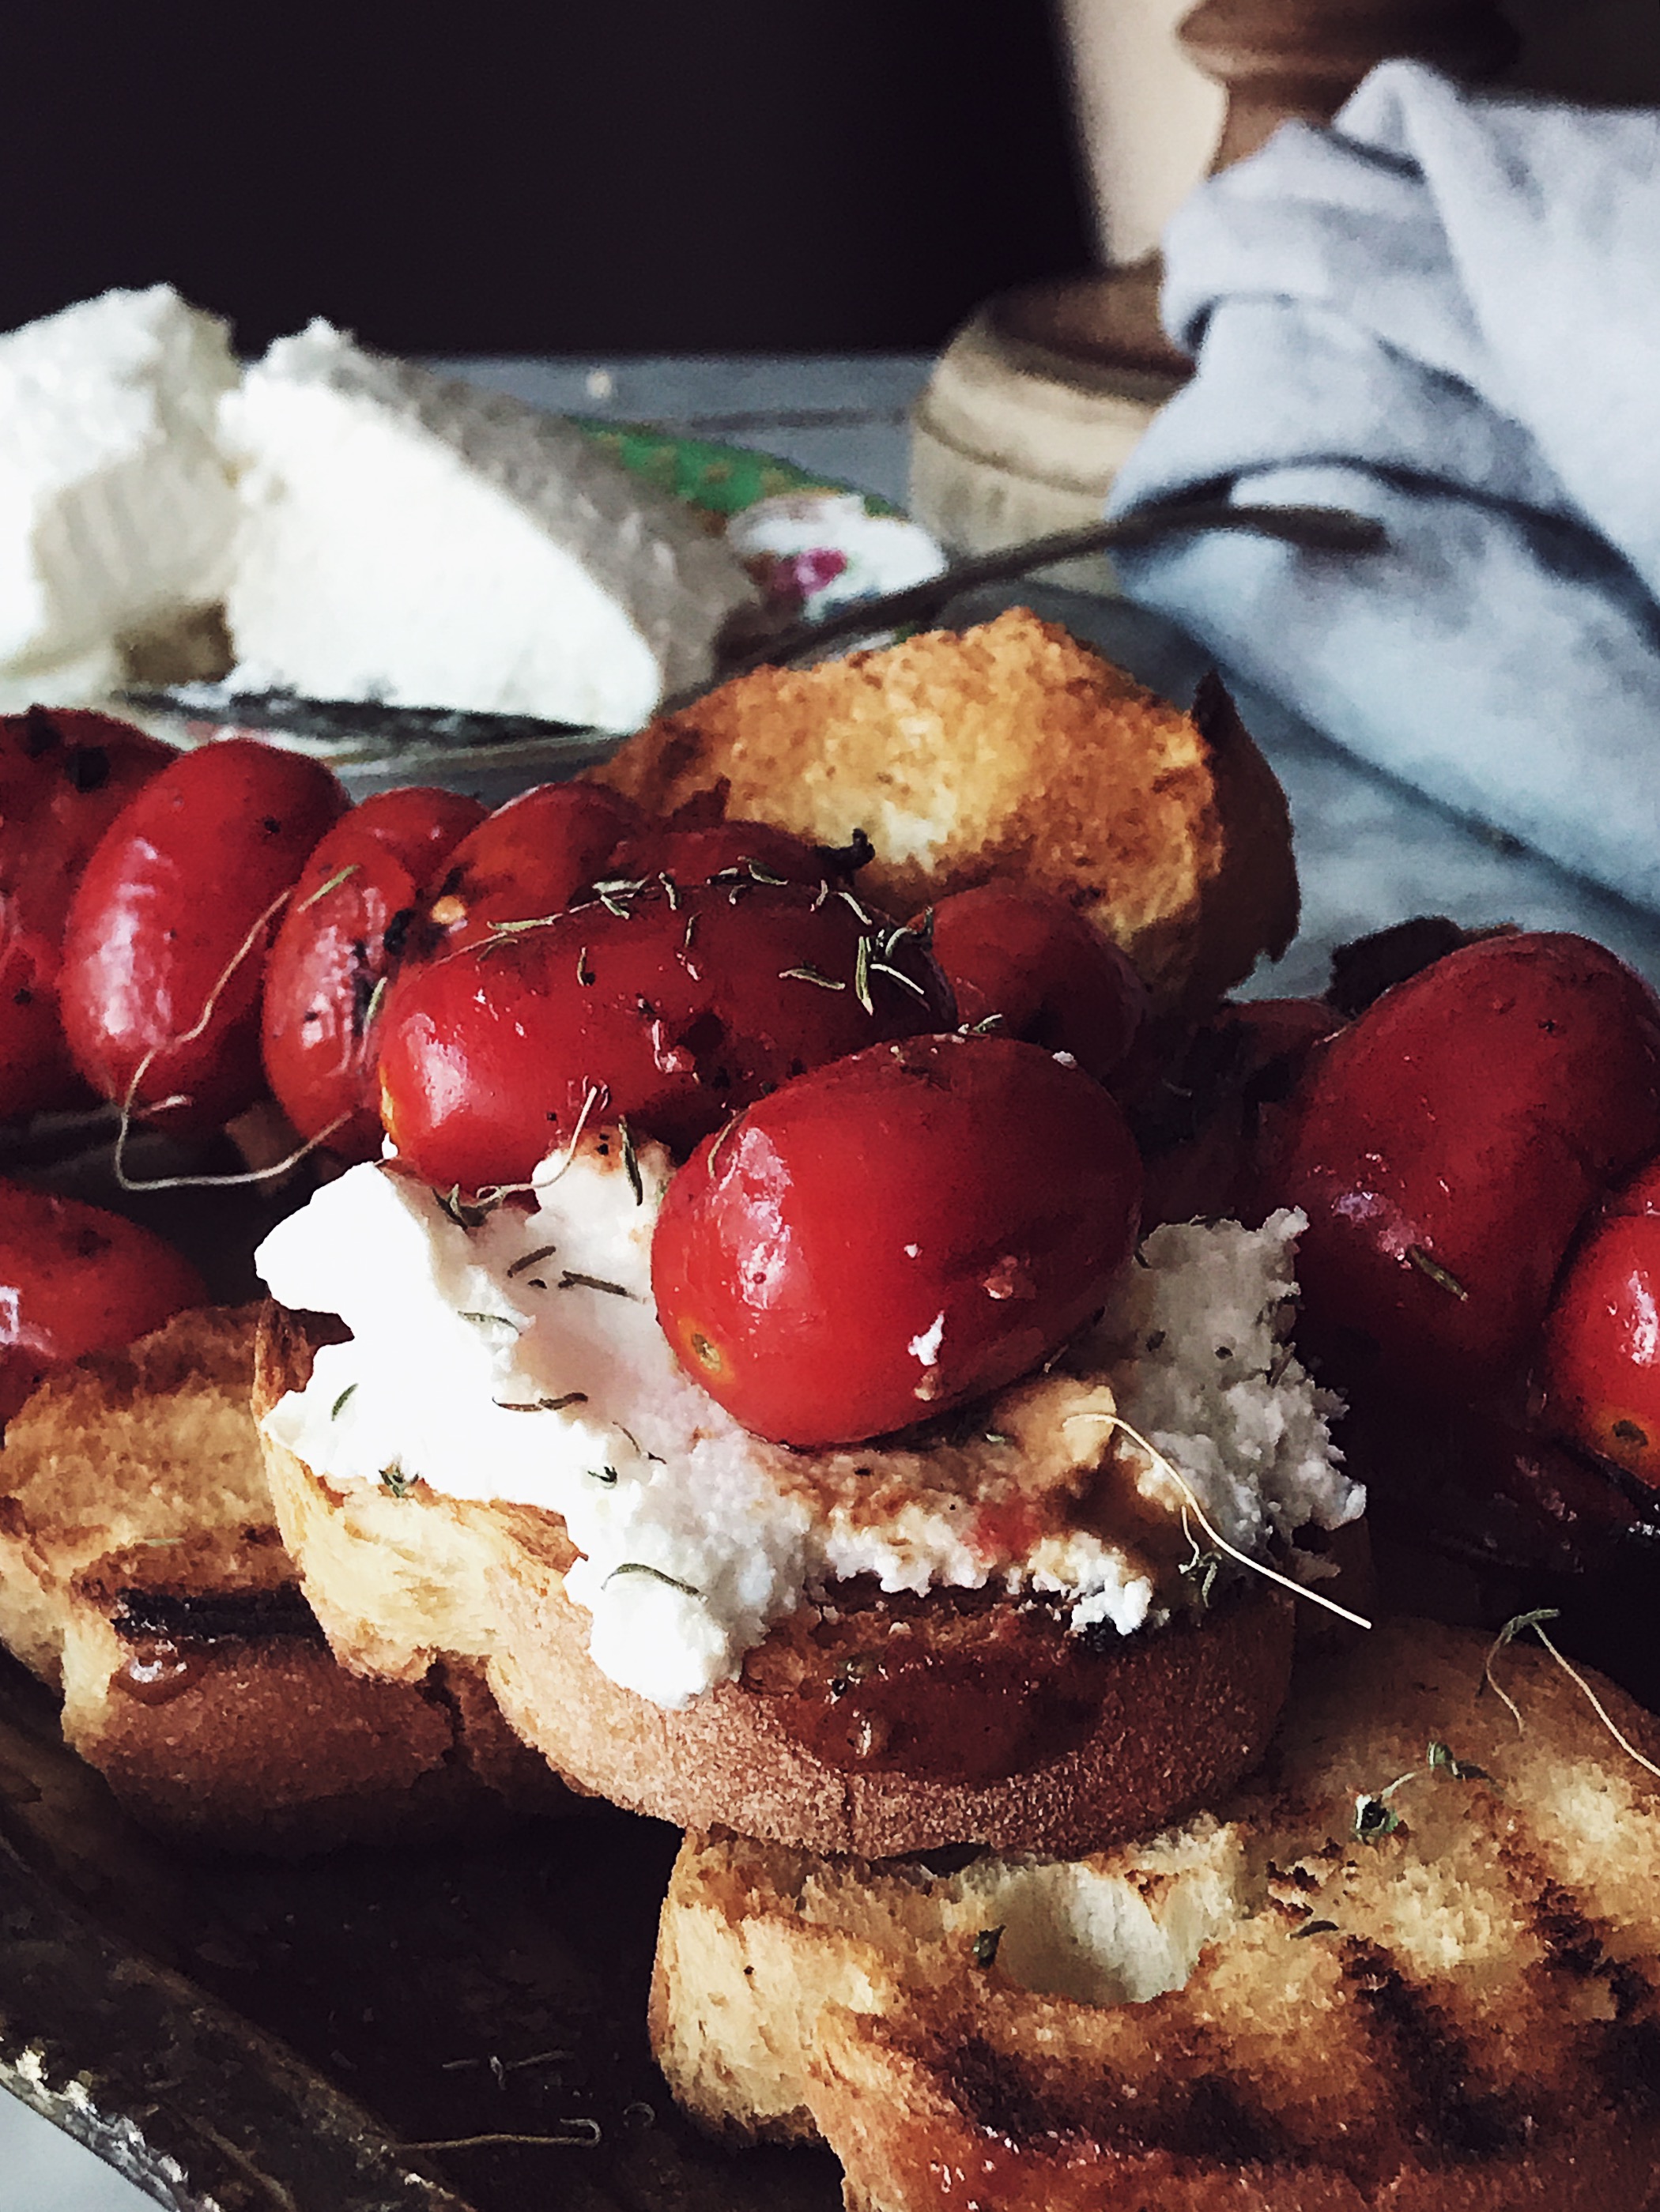 ricotta bruschetta with grilled cherry tomatoes skewers on an antique tray